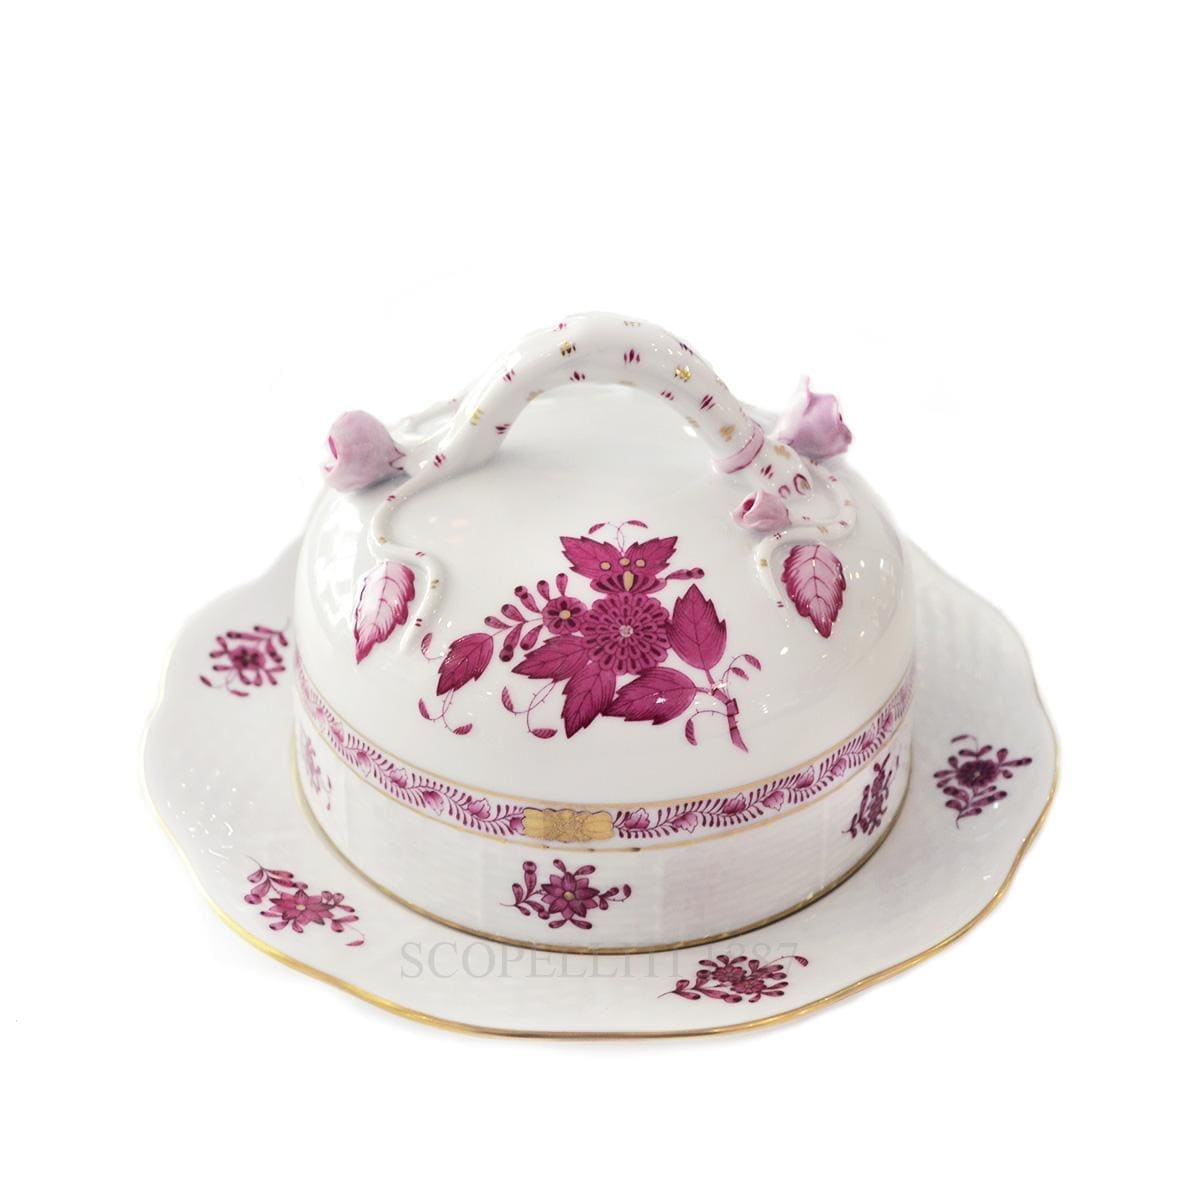 Herend Apponyi Butter Dish 390-02 AP Pink